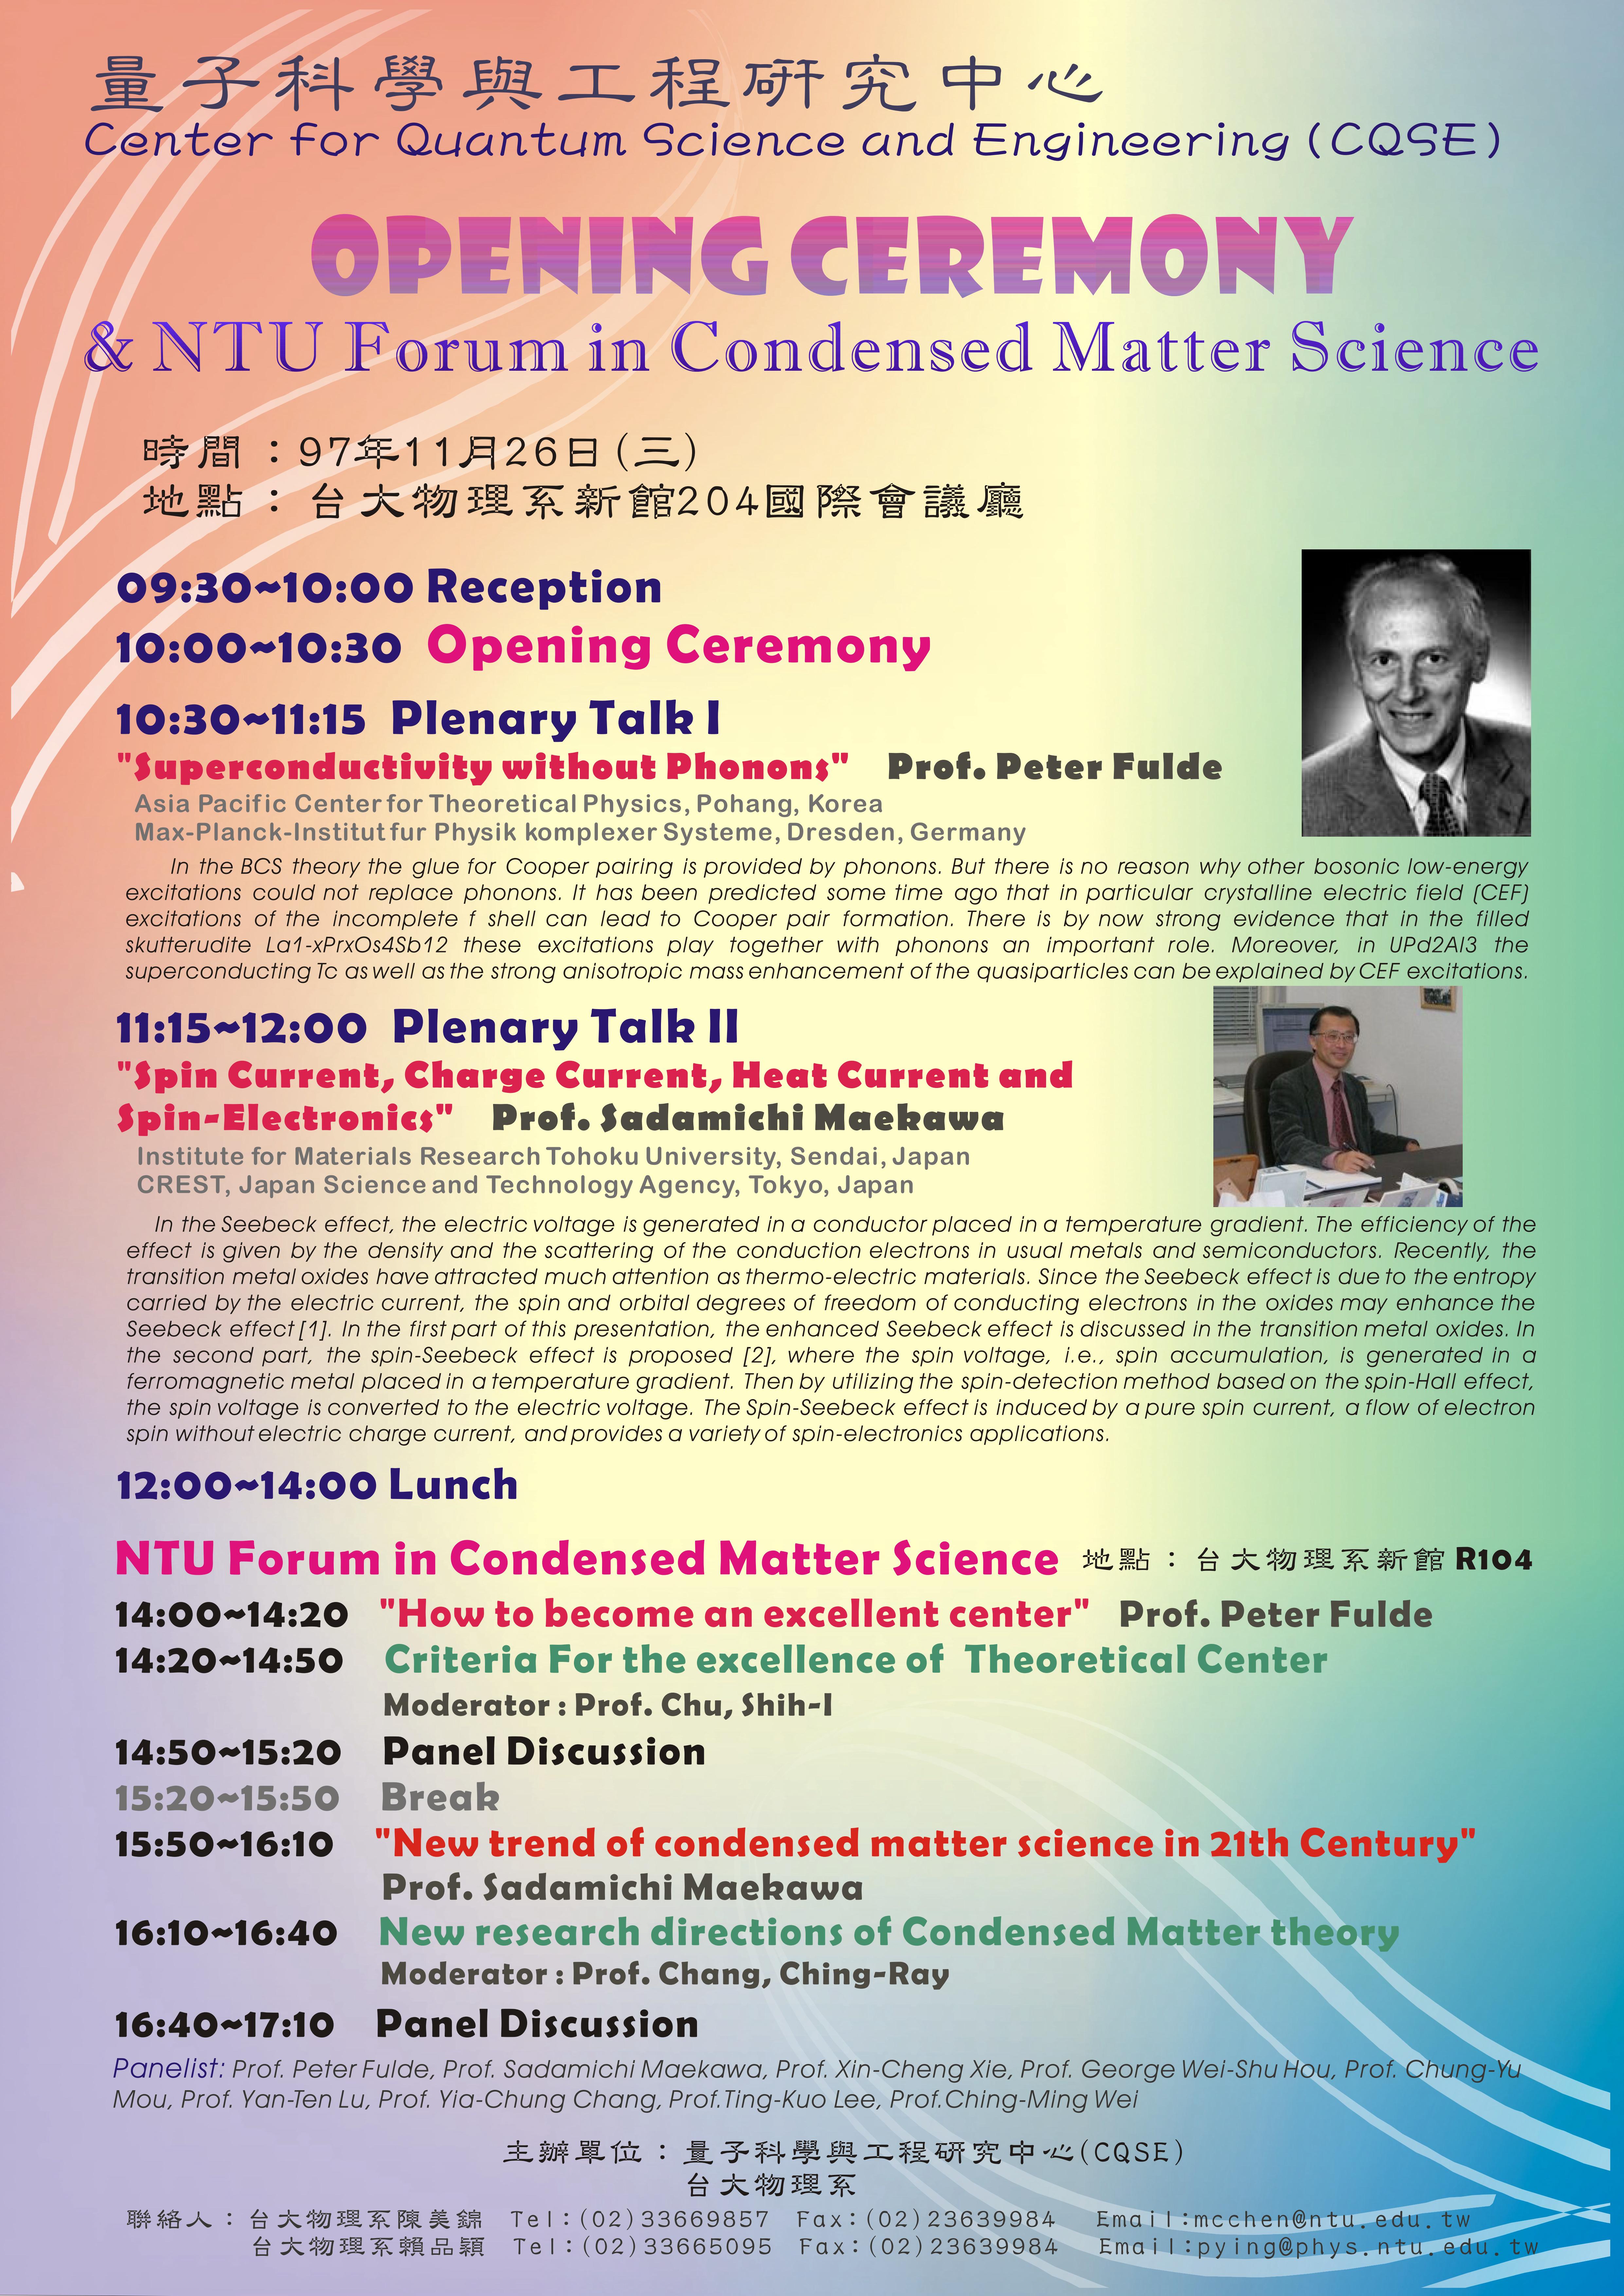 Center for Quantum Science and Engineering (CQSE) Kickoff Meeting & NTU Forum in Condensed Matter Science